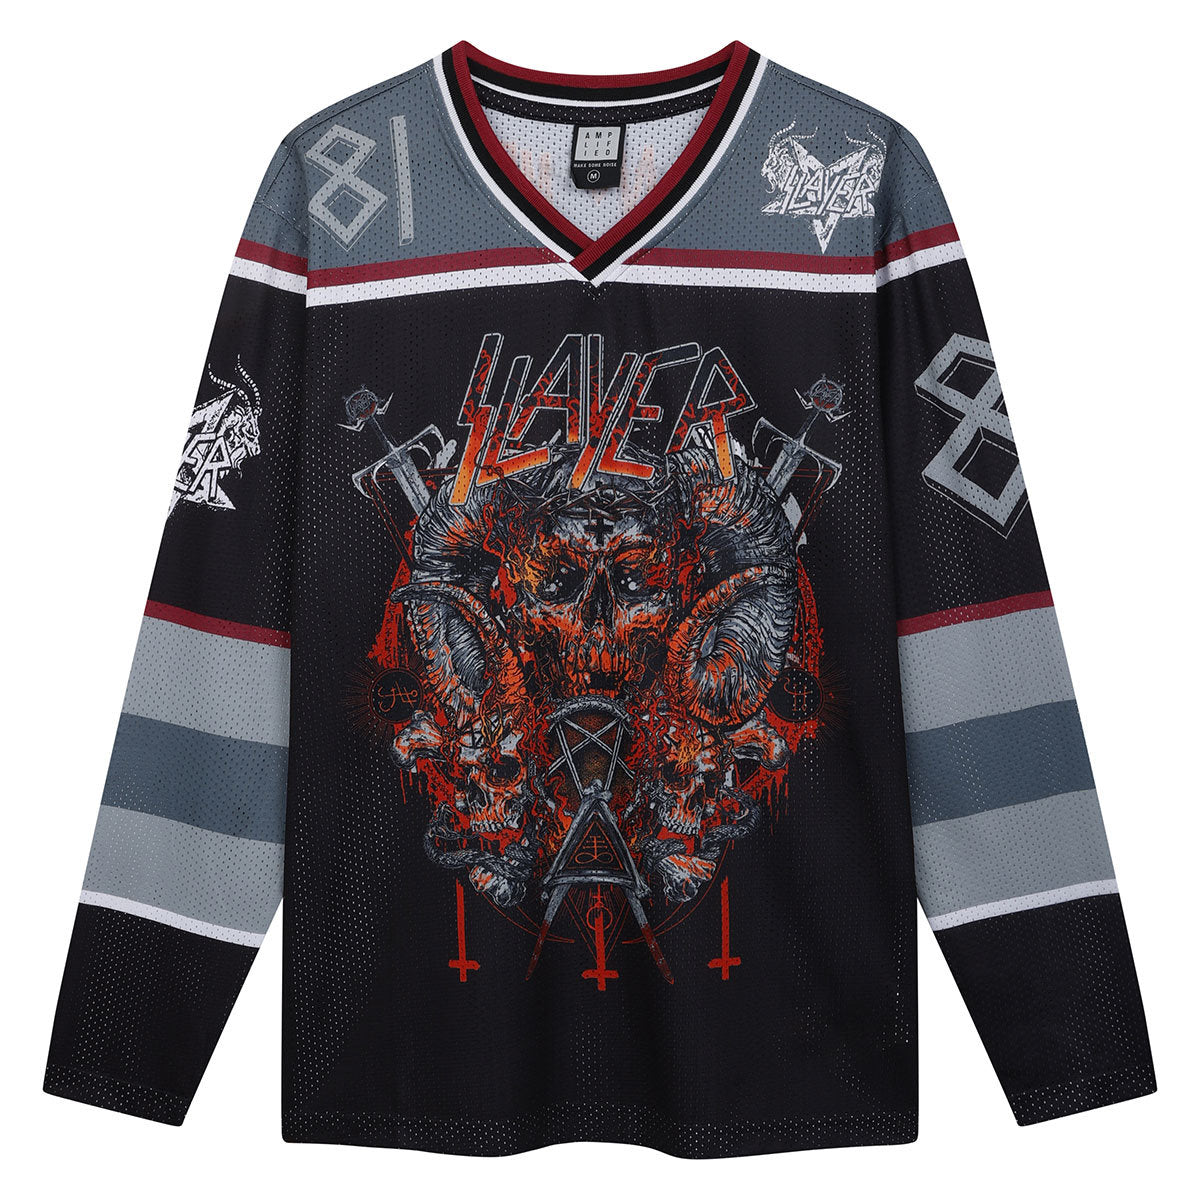 Amplified Slayer Hockey Jersey - Official Licensed Product